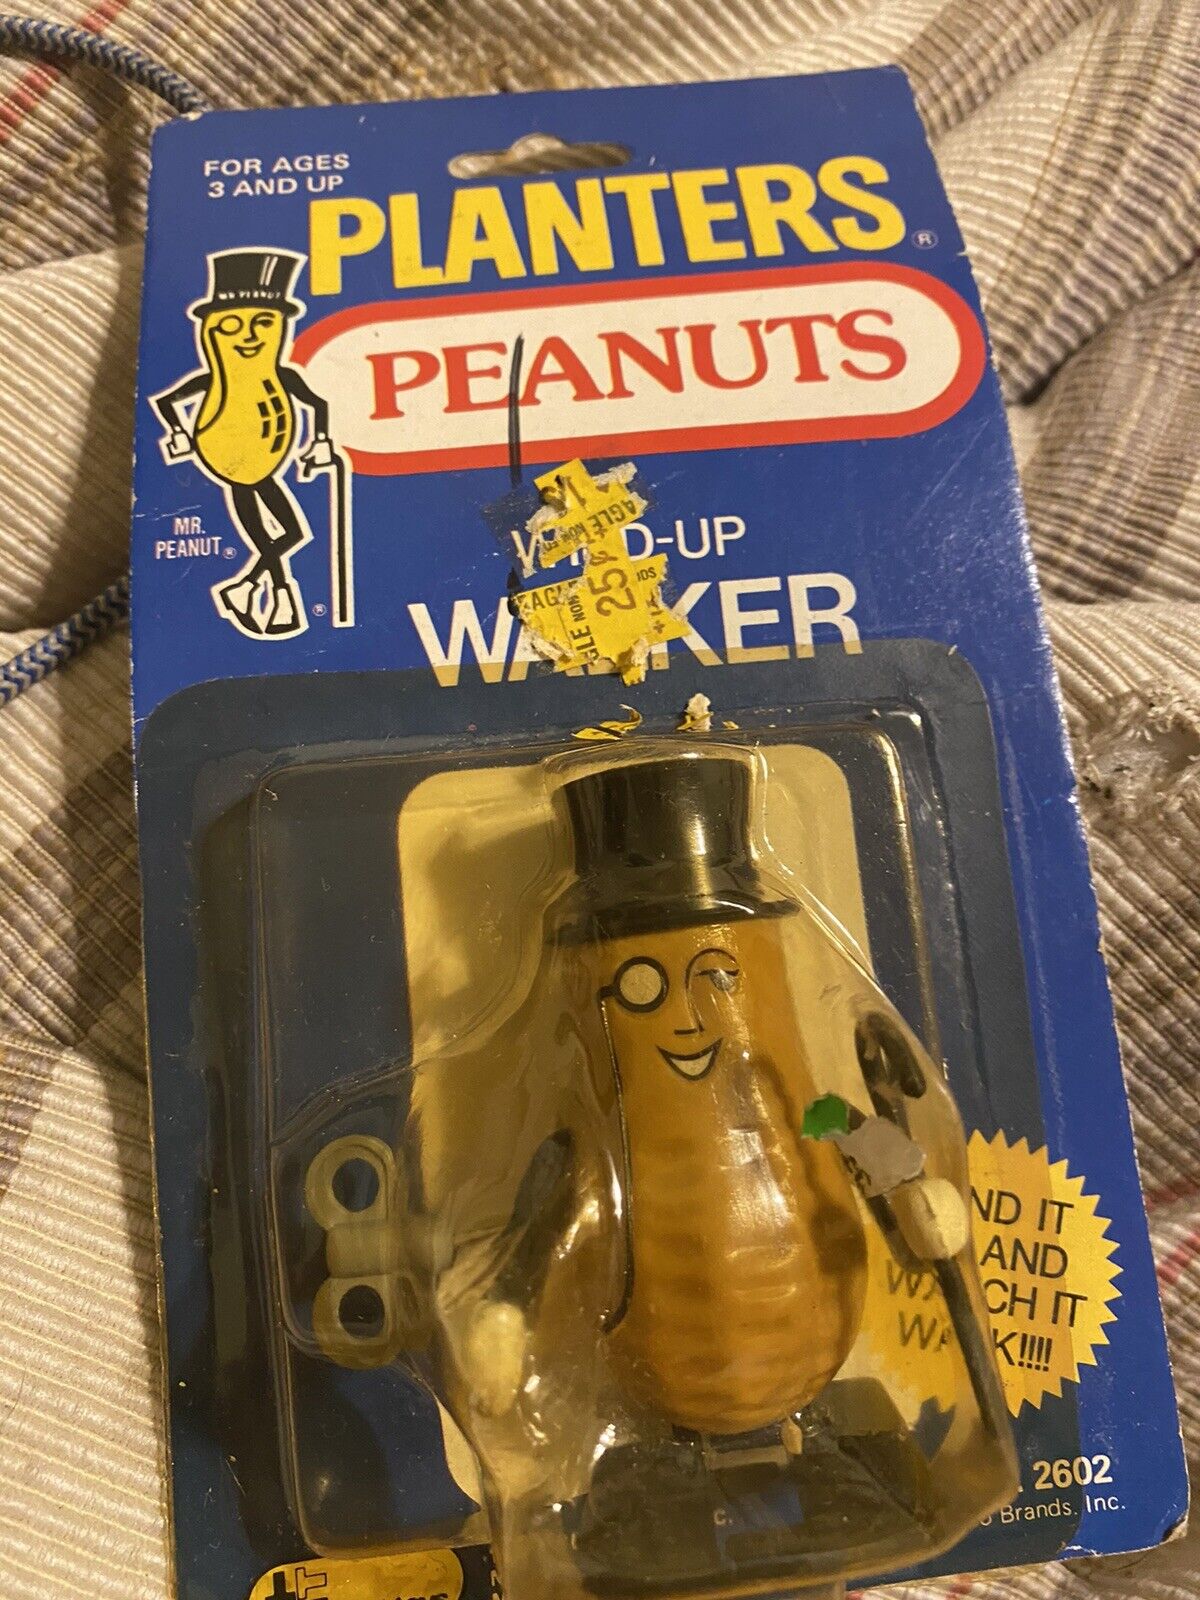 Older Wind Up Walk-in Planters Peanuts Toy